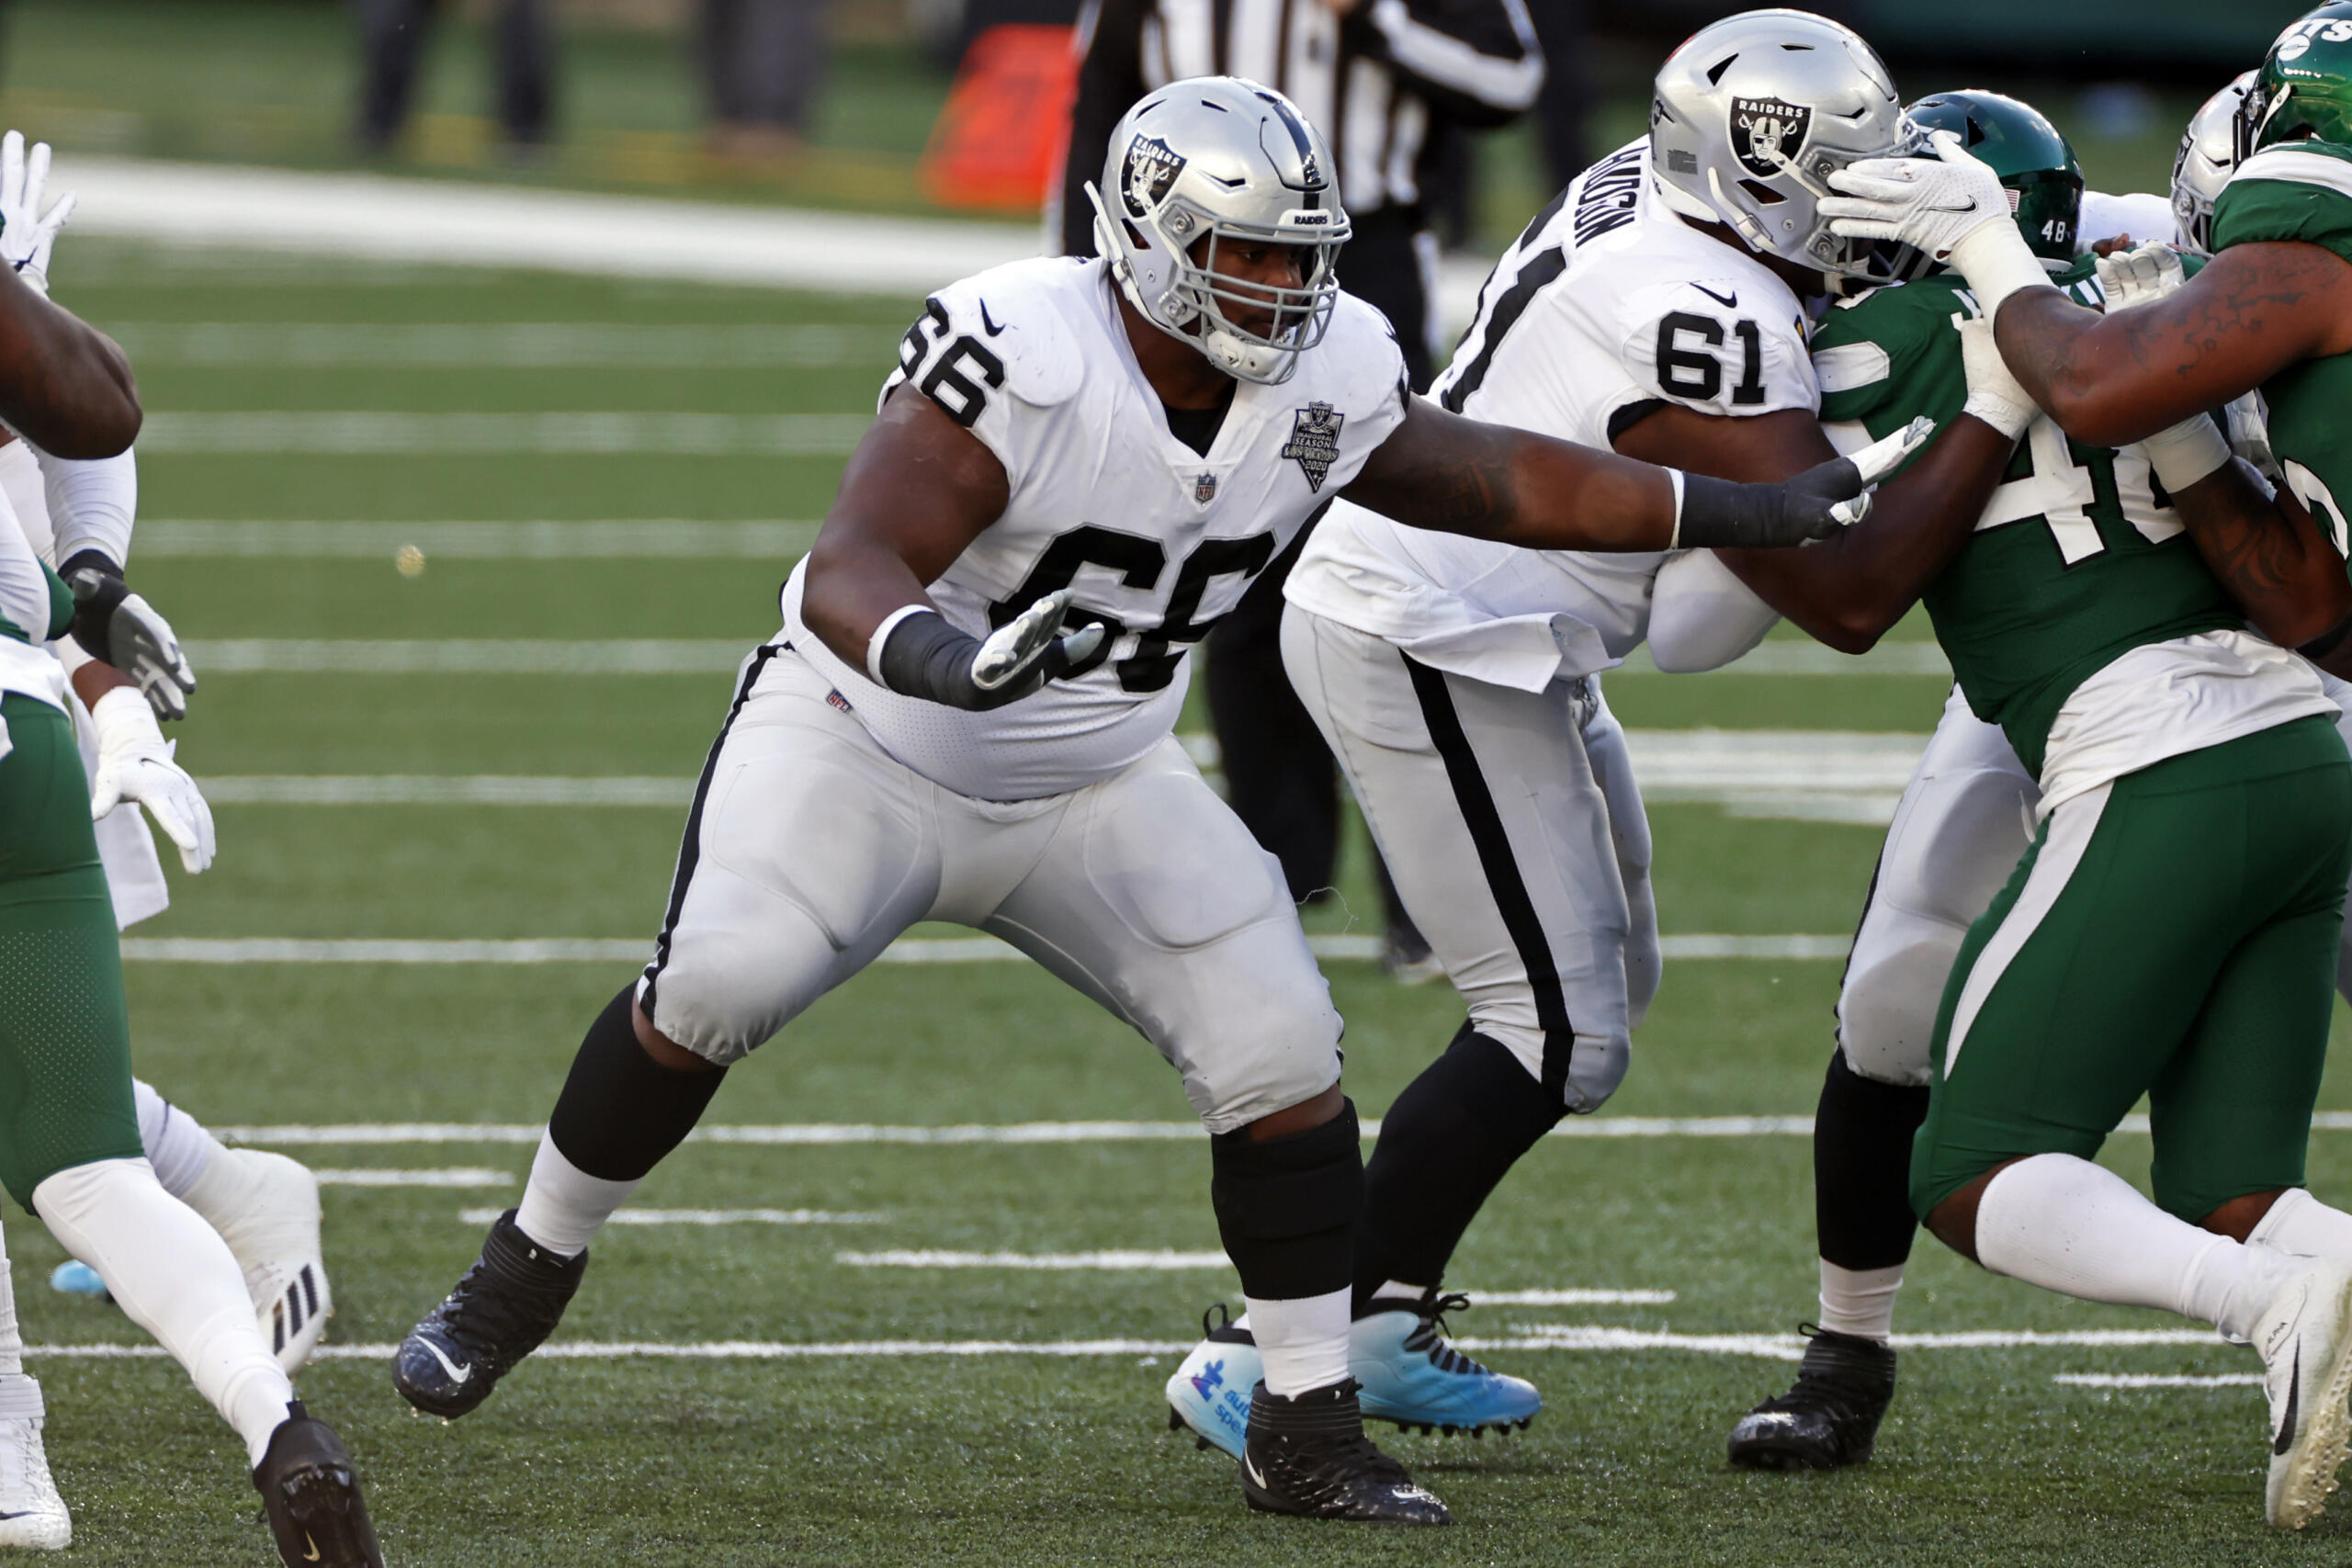 The Seattle Seahawks made their first big move to bolster their offensive line by acquiring veteran guard Gabe Jackson from the Las Vegas Raiders for a fifth-round draft pick on Thursday, March 18, 2021.